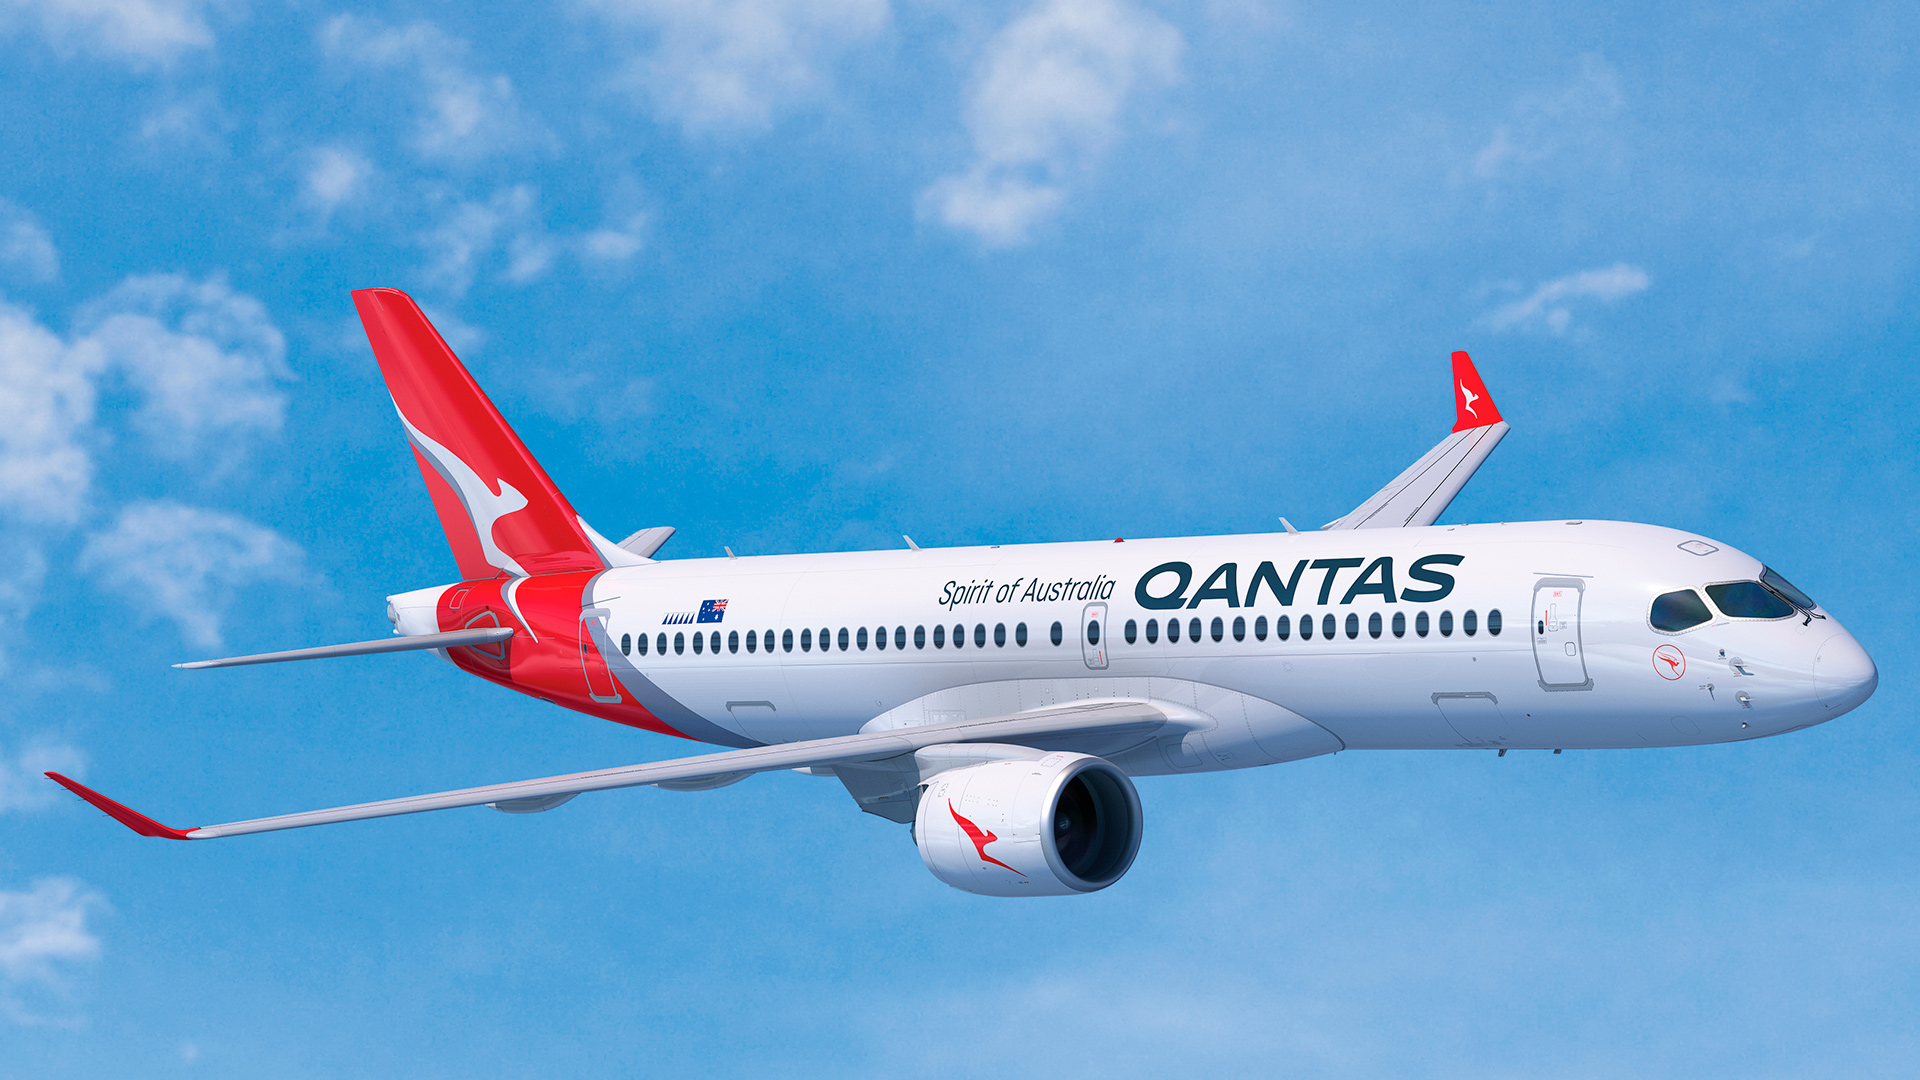 Qantas Selects A220-300 for Domestic Fleet Replacement